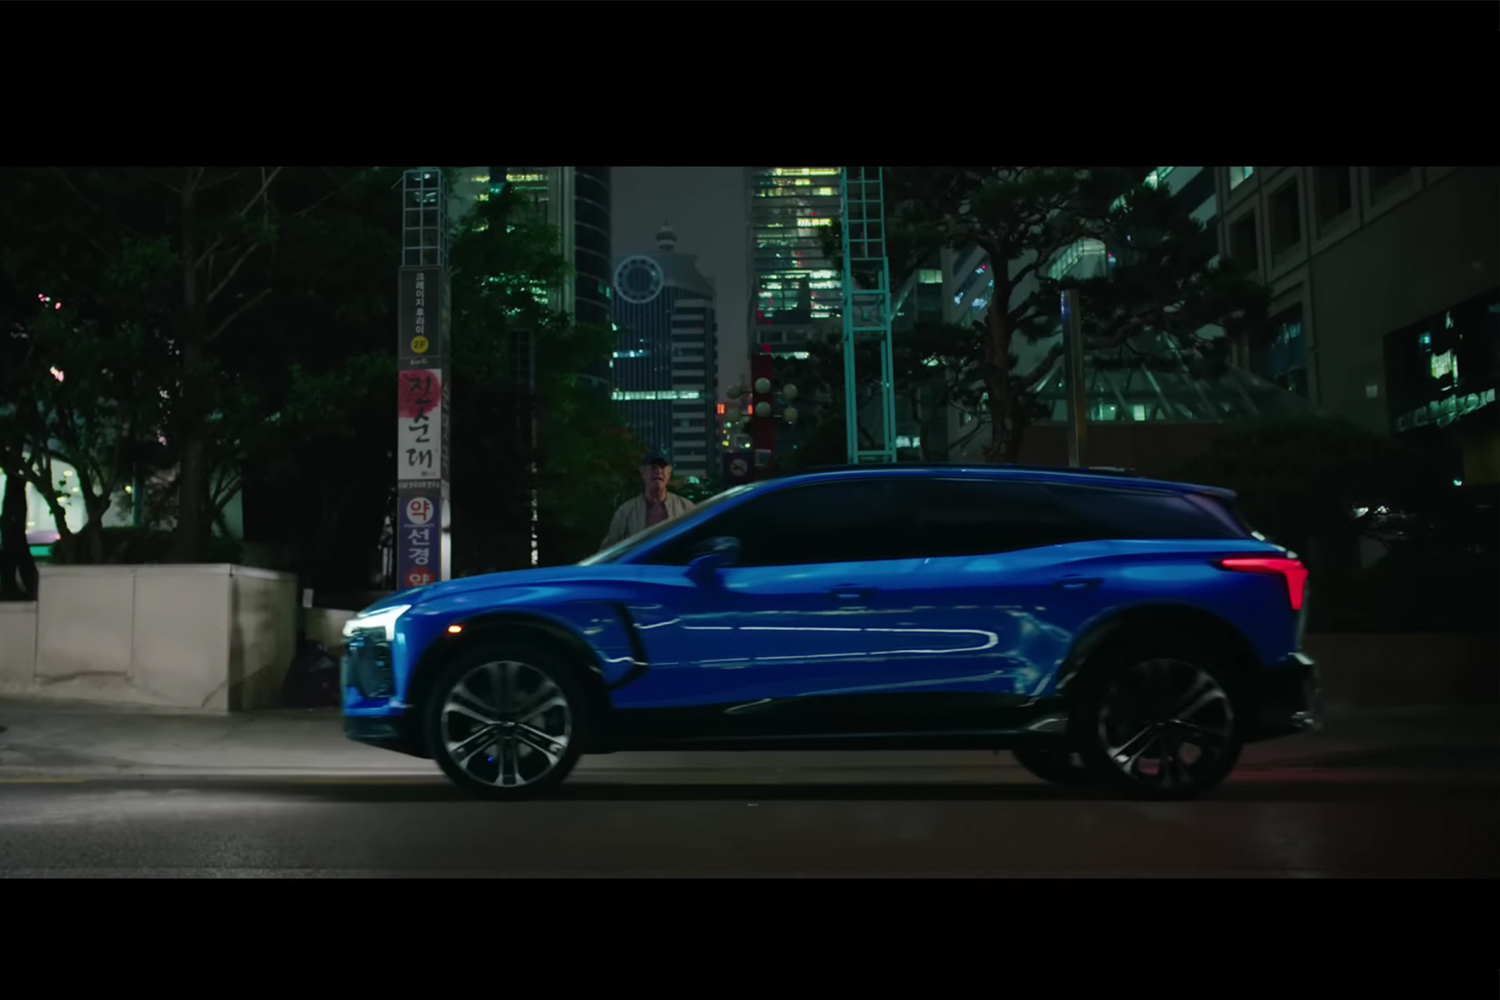 Will Ferrell stands next to the Chevrolet Blazer EV in a scene from "Squid Game"